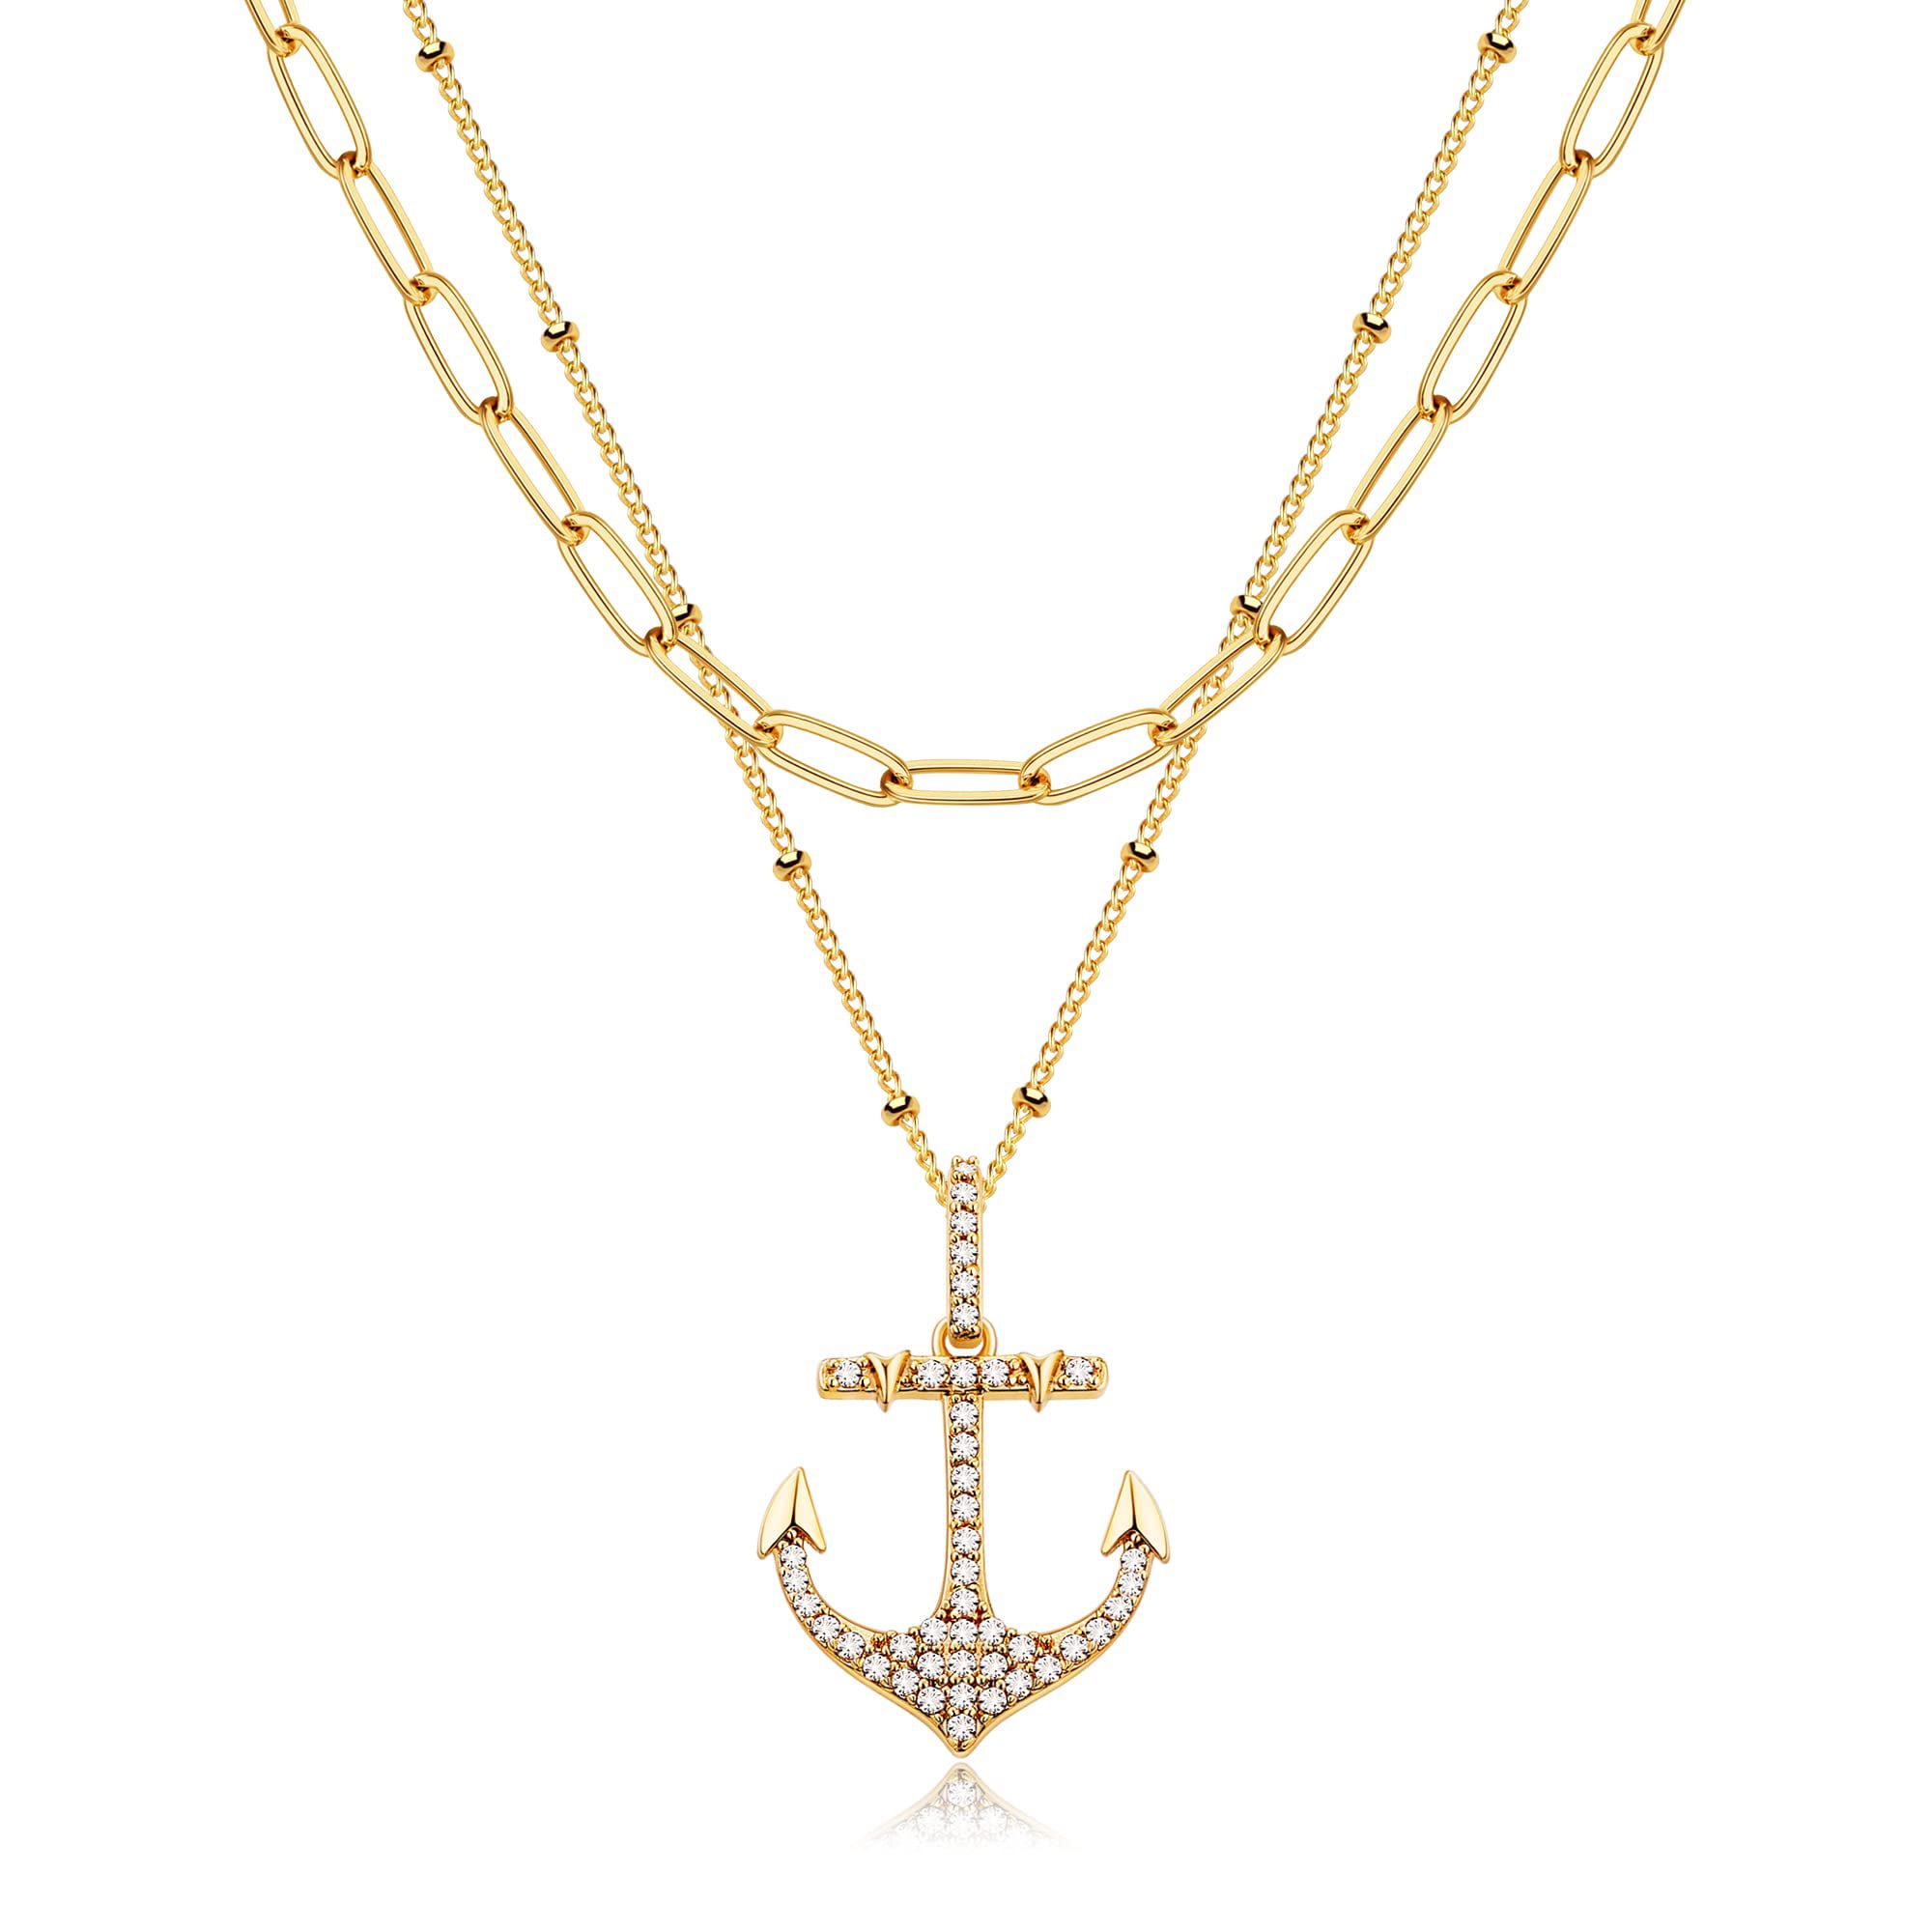 Can be Layered Multi Chain Dainty 18K Gold Moon Pendant Chain